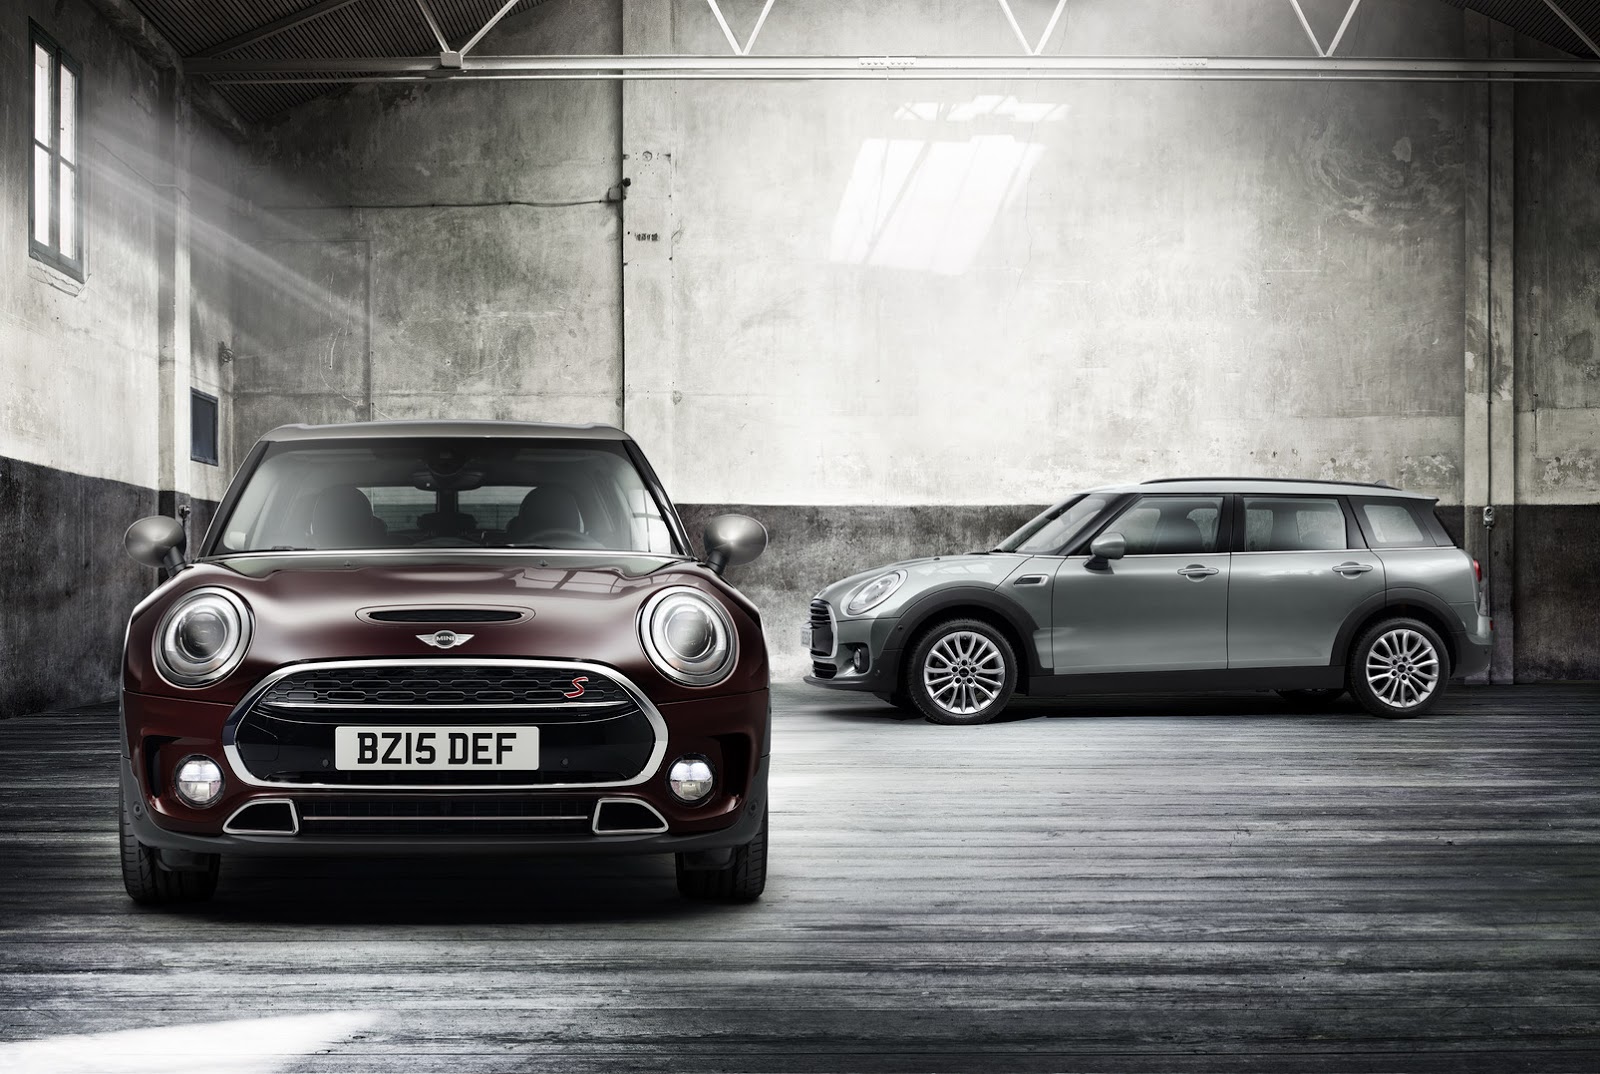 New Clubman Is MINI’s Biggest Car To Date, Has 6 Doors [83 Photos ...